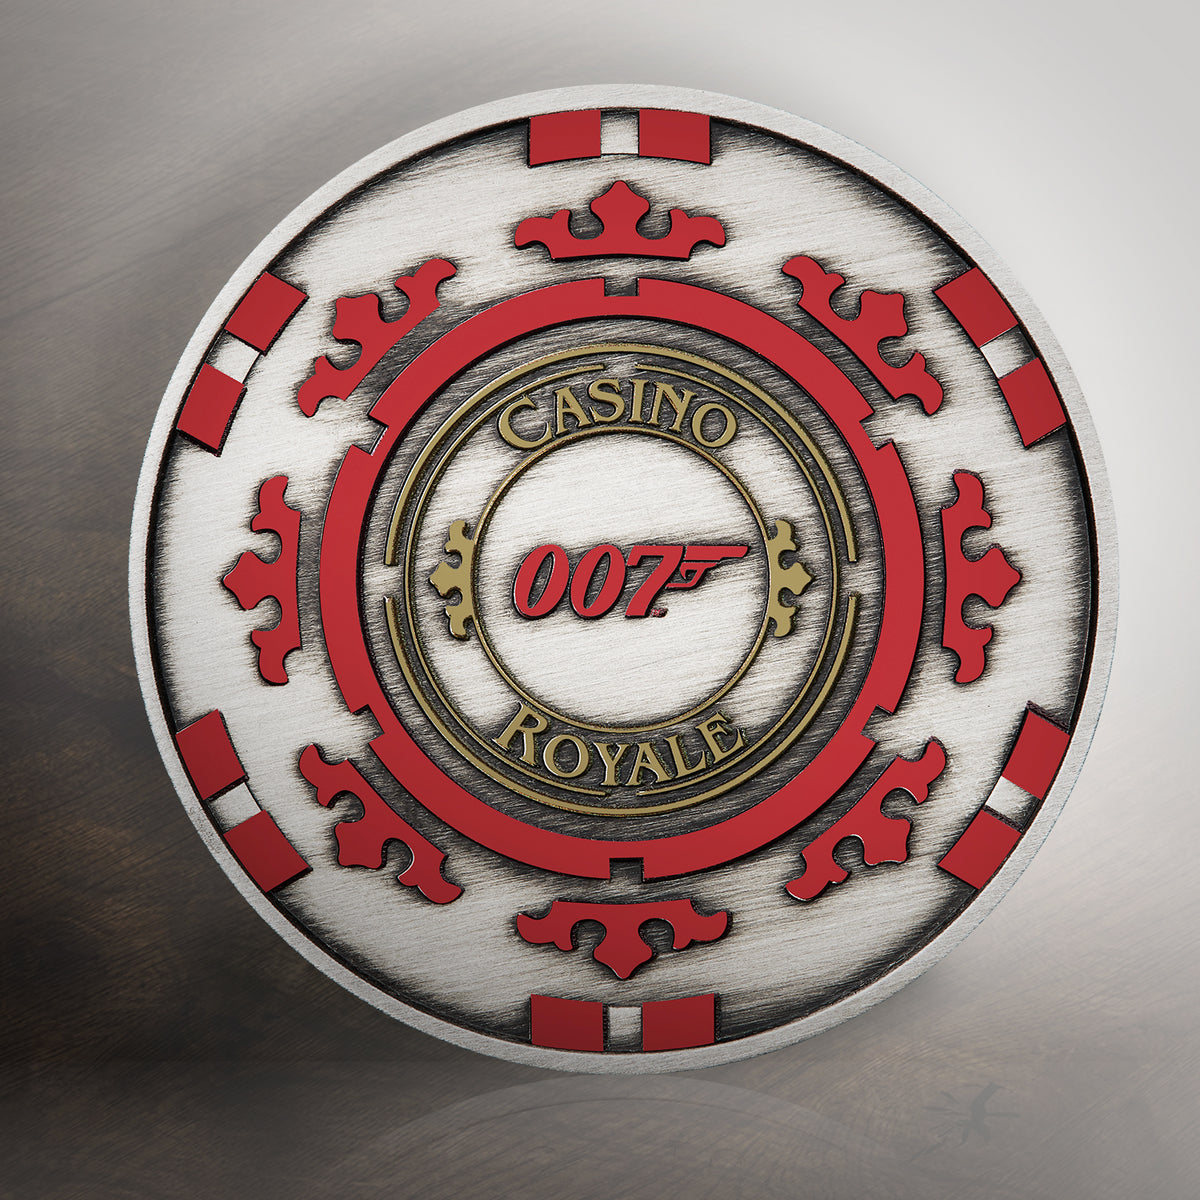 James Bond 1oz Silver Antiqued Casino Chip Coin - Casino Royale Limited Edition - By The Perth Mint